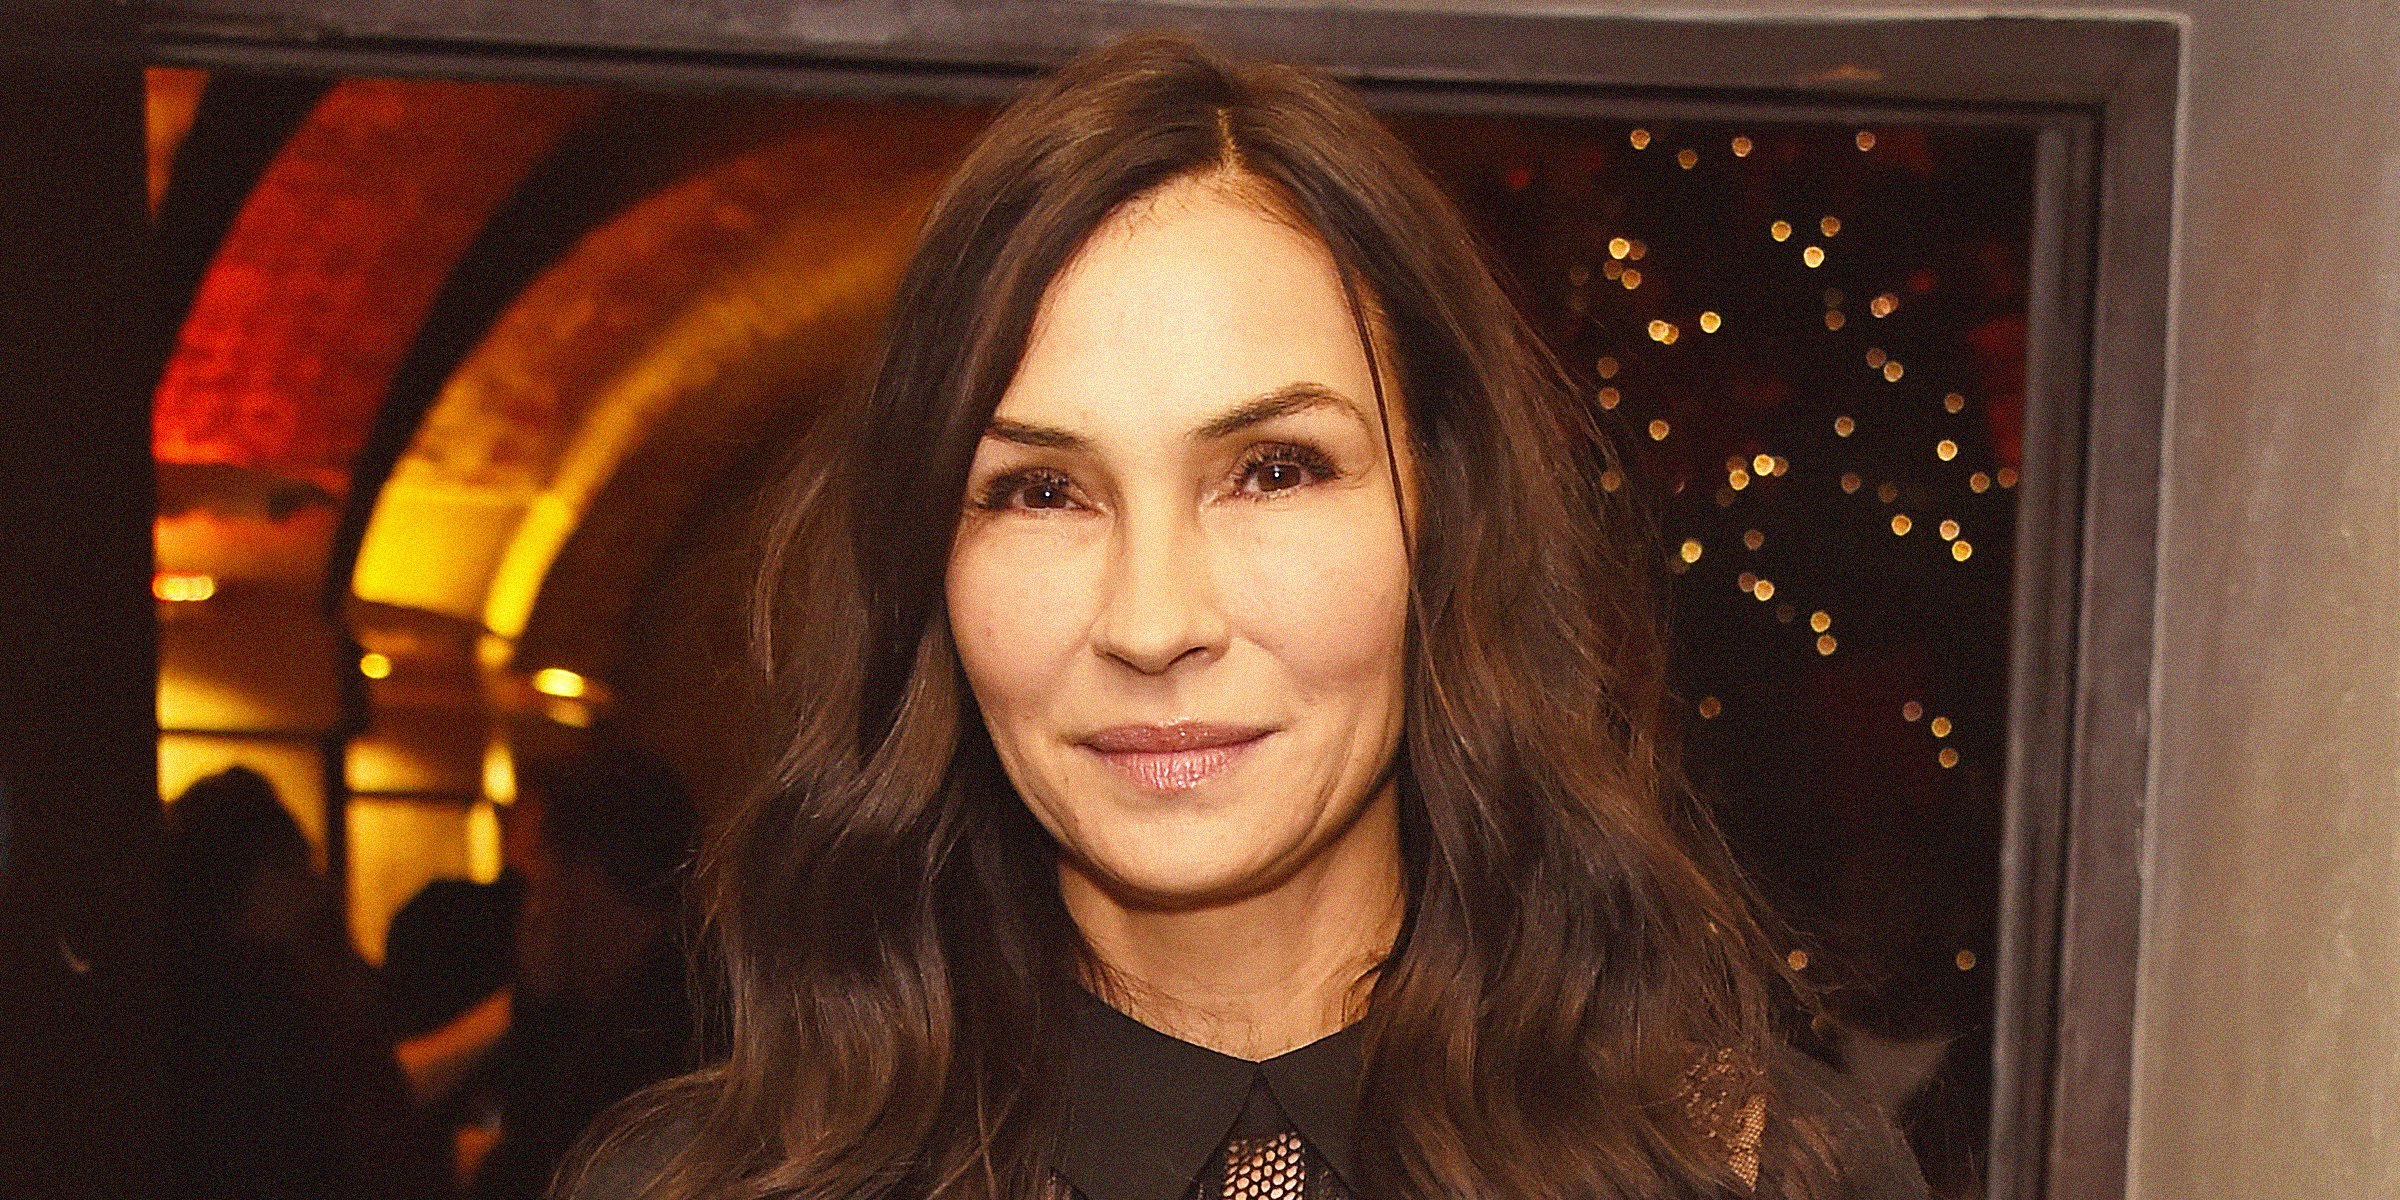 Does Famke Janssen Have A Husband The Actress Is Private About Her Love Life